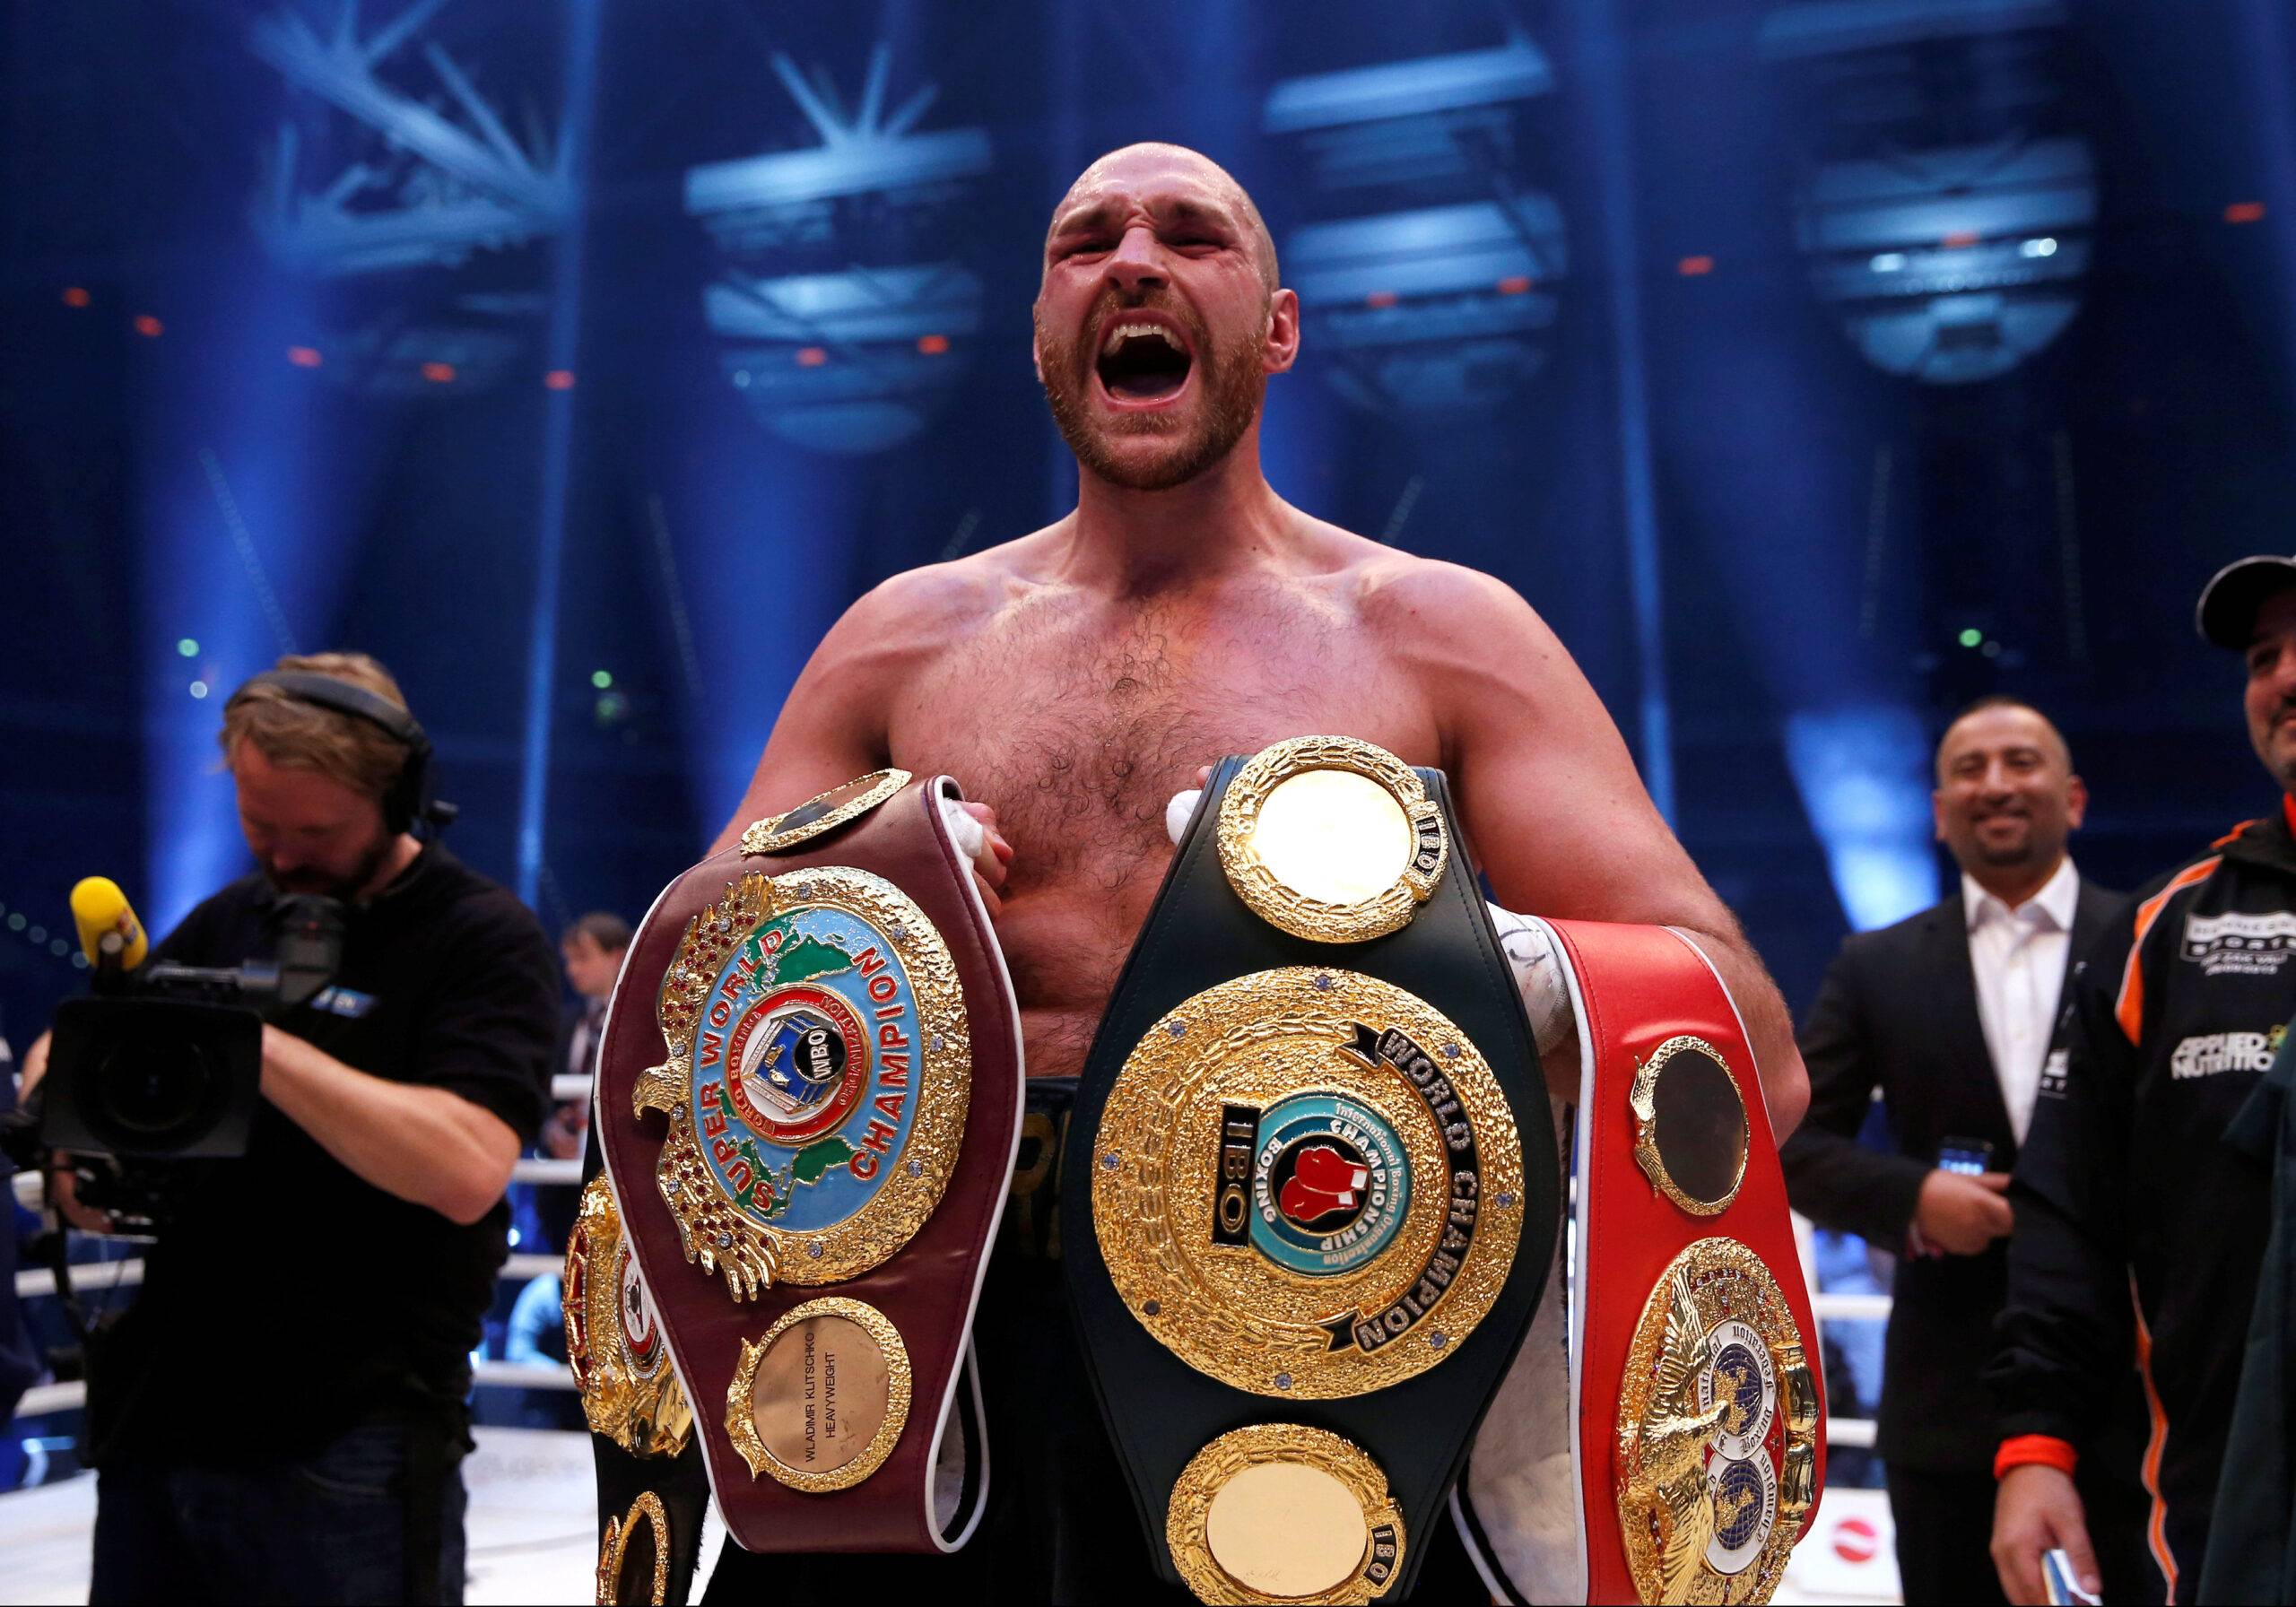 Tyson Fury shocked the world by beating Wladimir Klitschko on this day in 2015